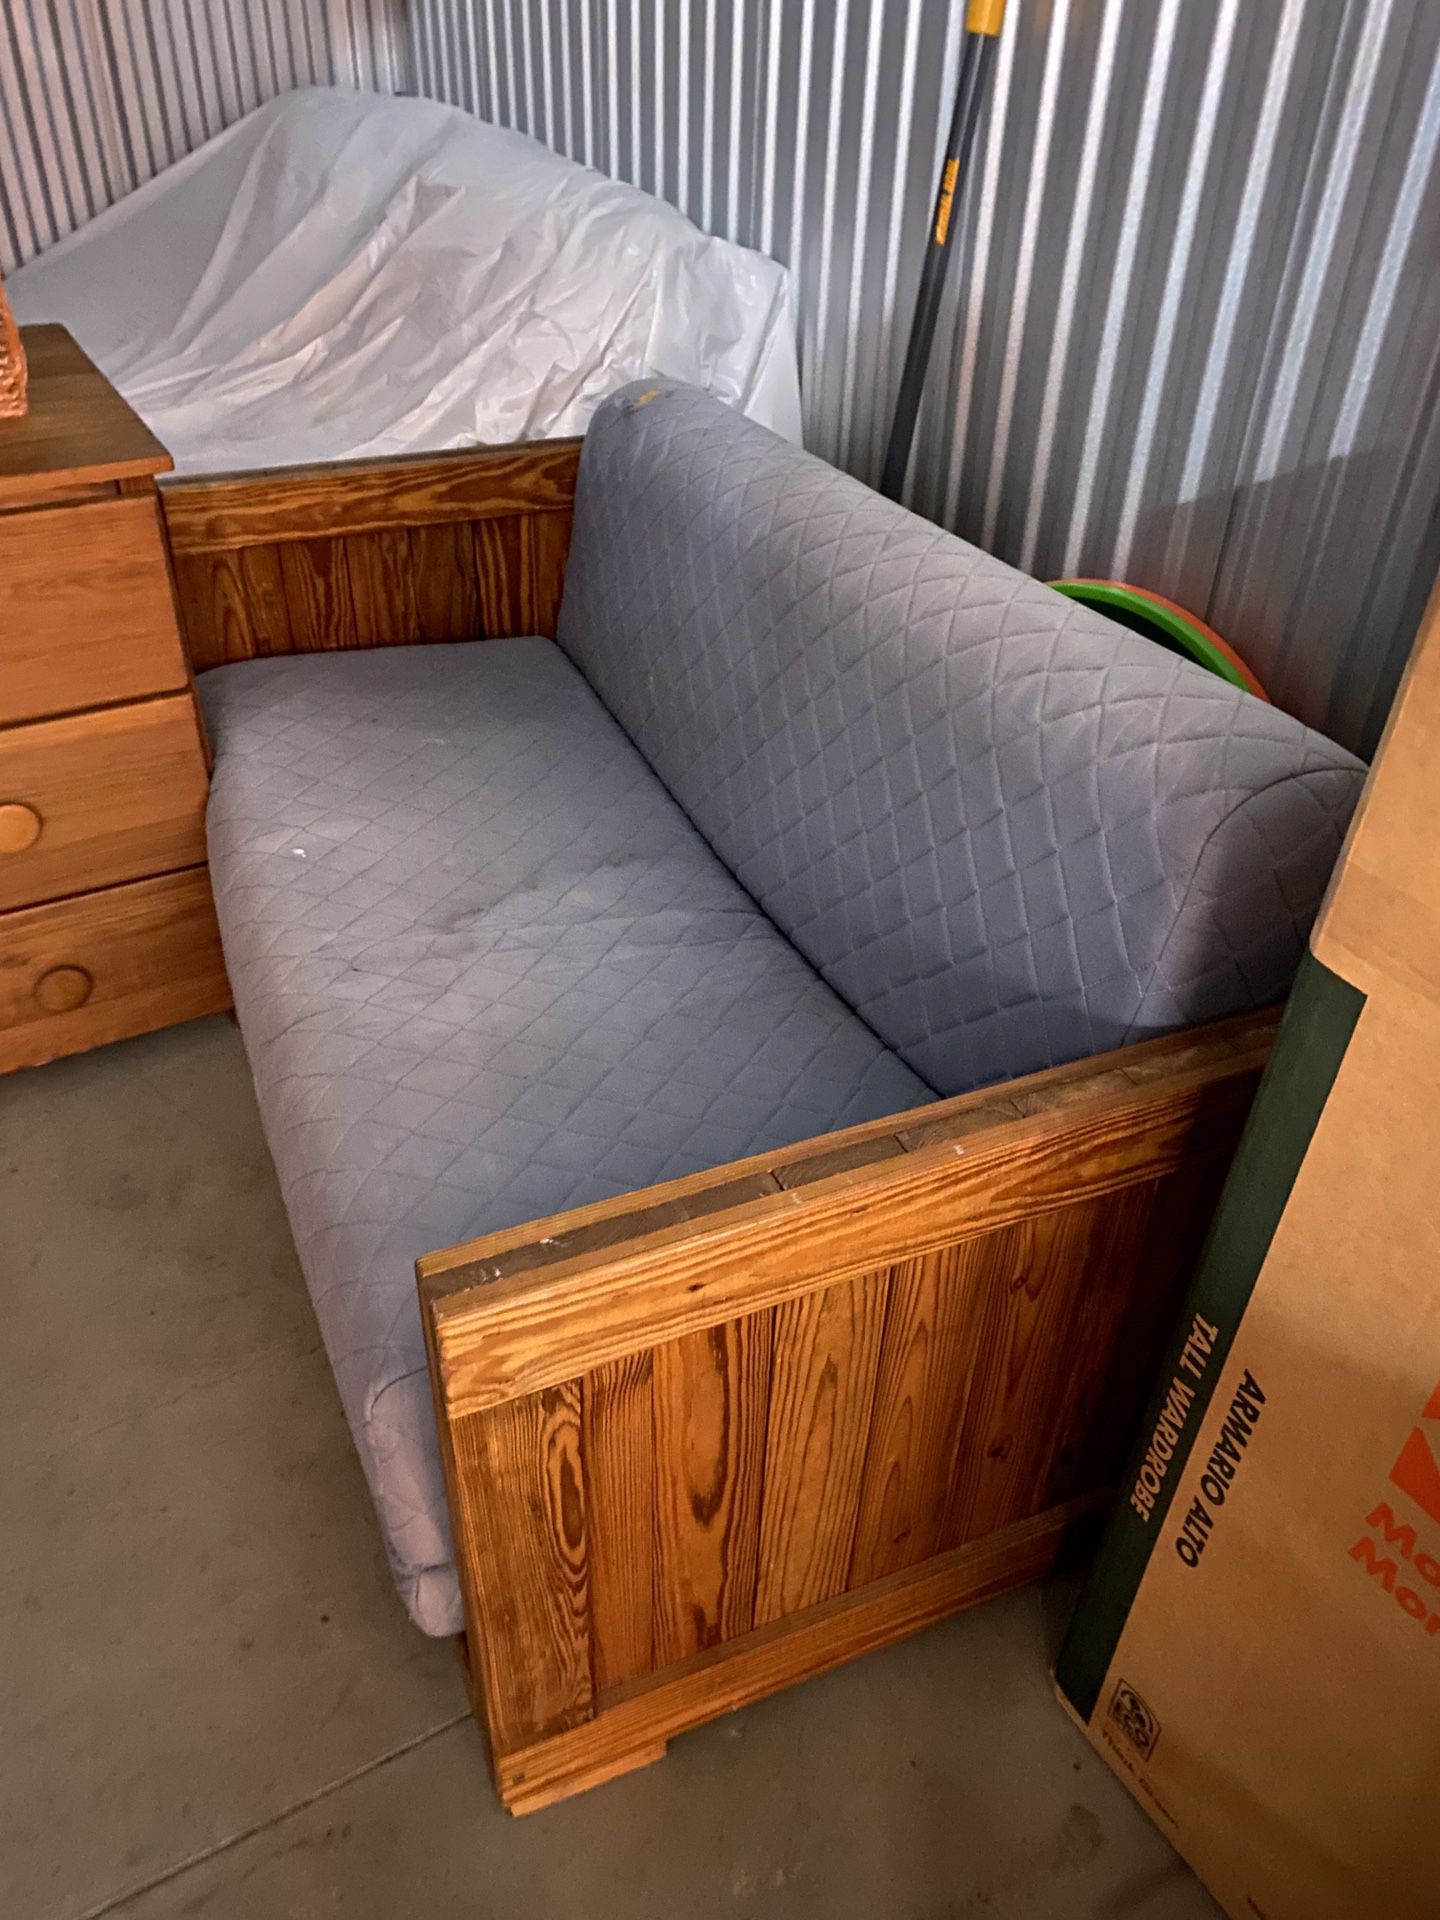 Full size futon couch